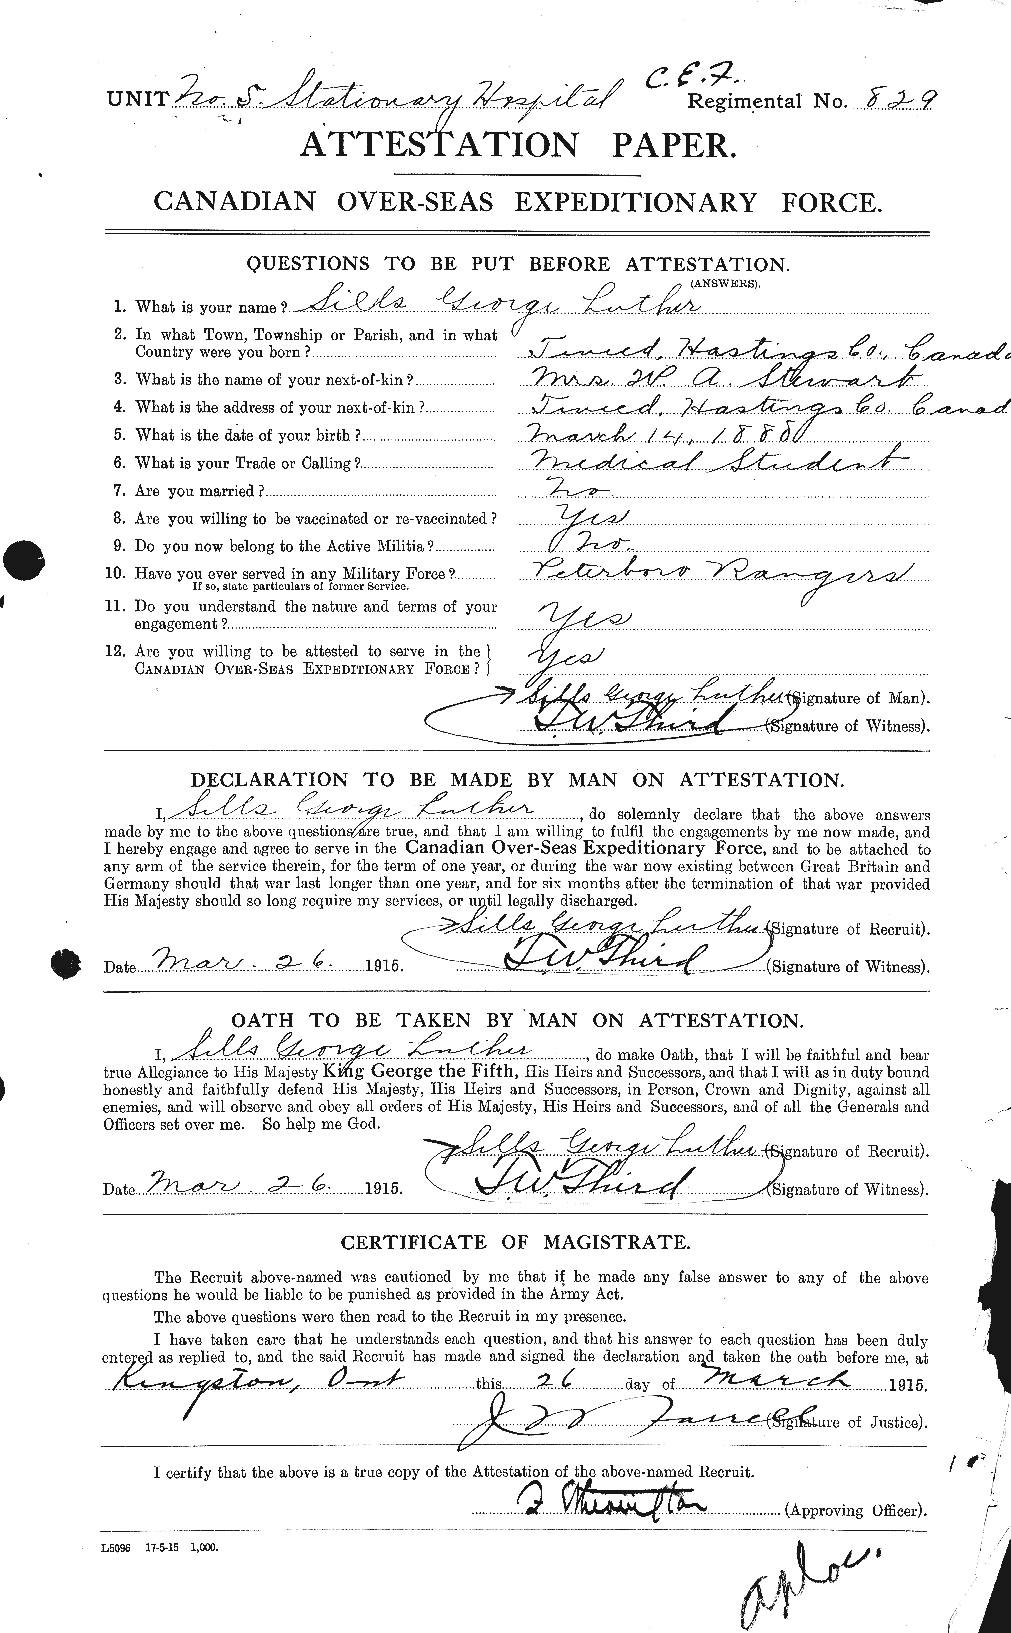 Personnel Records of the First World War - CEF 096541a